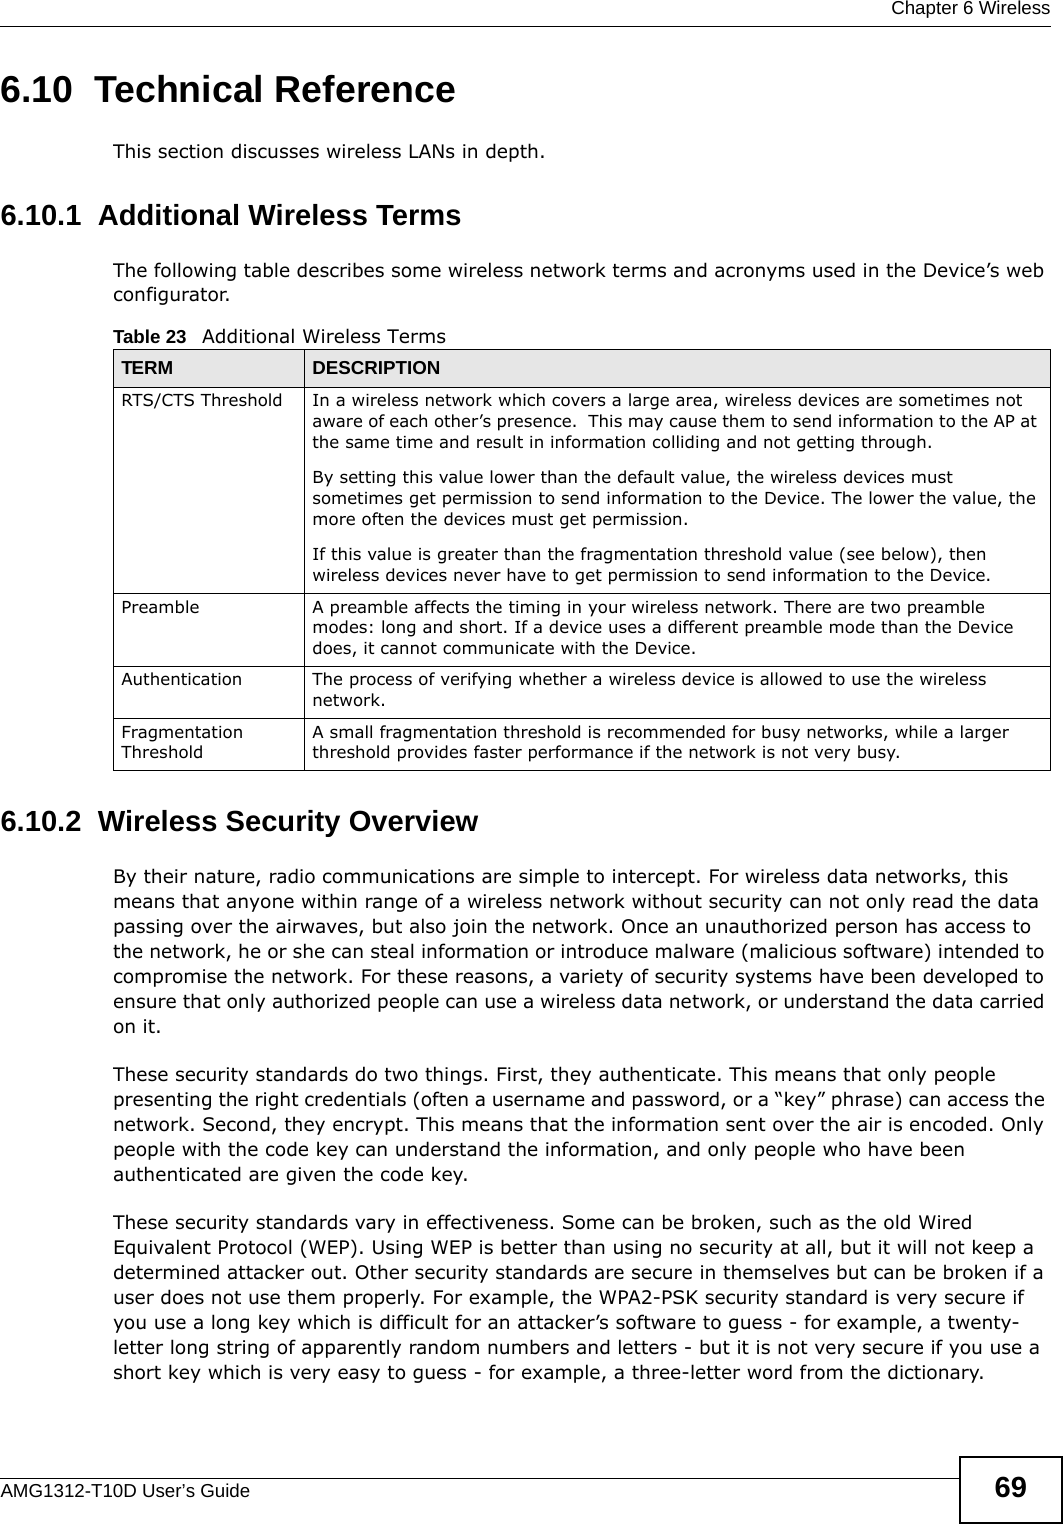  Chapter 6 WirelessAMG1312-T10D User’s Guide 696.10  Technical ReferenceThis section discusses wireless LANs in depth. 6.10.1  Additional Wireless TermsThe following table describes some wireless network terms and acronyms used in the Device’s web configurator.6.10.2  Wireless Security OverviewBy their nature, radio communications are simple to intercept. For wireless data networks, this means that anyone within range of a wireless network without security can not only read the data passing over the airwaves, but also join the network. Once an unauthorized person has access to the network, he or she can steal information or introduce malware (malicious software) intended to compromise the network. For these reasons, a variety of security systems have been developed to ensure that only authorized people can use a wireless data network, or understand the data carried on it.These security standards do two things. First, they authenticate. This means that only people presenting the right credentials (often a username and password, or a “key” phrase) can access the network. Second, they encrypt. This means that the information sent over the air is encoded. Only people with the code key can understand the information, and only people who have been authenticated are given the code key.These security standards vary in effectiveness. Some can be broken, such as the old Wired Equivalent Protocol (WEP). Using WEP is better than using no security at all, but it will not keep a determined attacker out. Other security standards are secure in themselves but can be broken if a user does not use them properly. For example, the WPA2-PSK security standard is very secure if you use a long key which is difficult for an attacker’s software to guess - for example, a twenty-letter long string of apparently random numbers and letters - but it is not very secure if you use a short key which is very easy to guess - for example, a three-letter word from the dictionary.Table 23   Additional Wireless TermsTERM DESCRIPTIONRTS/CTS Threshold In a wireless network which covers a large area, wireless devices are sometimes not aware of each other’s presence.  This may cause them to send information to the AP at the same time and result in information colliding and not getting through.By setting this value lower than the default value, the wireless devices must sometimes get permission to send information to the Device. The lower the value, the more often the devices must get permission.If this value is greater than the fragmentation threshold value (see below), then wireless devices never have to get permission to send information to the Device.Preamble A preamble affects the timing in your wireless network. There are two preamble modes: long and short. If a device uses a different preamble mode than the Device does, it cannot communicate with the Device.Authentication The process of verifying whether a wireless device is allowed to use the wireless network.Fragmentation ThresholdA small fragmentation threshold is recommended for busy networks, while a larger threshold provides faster performance if the network is not very busy.